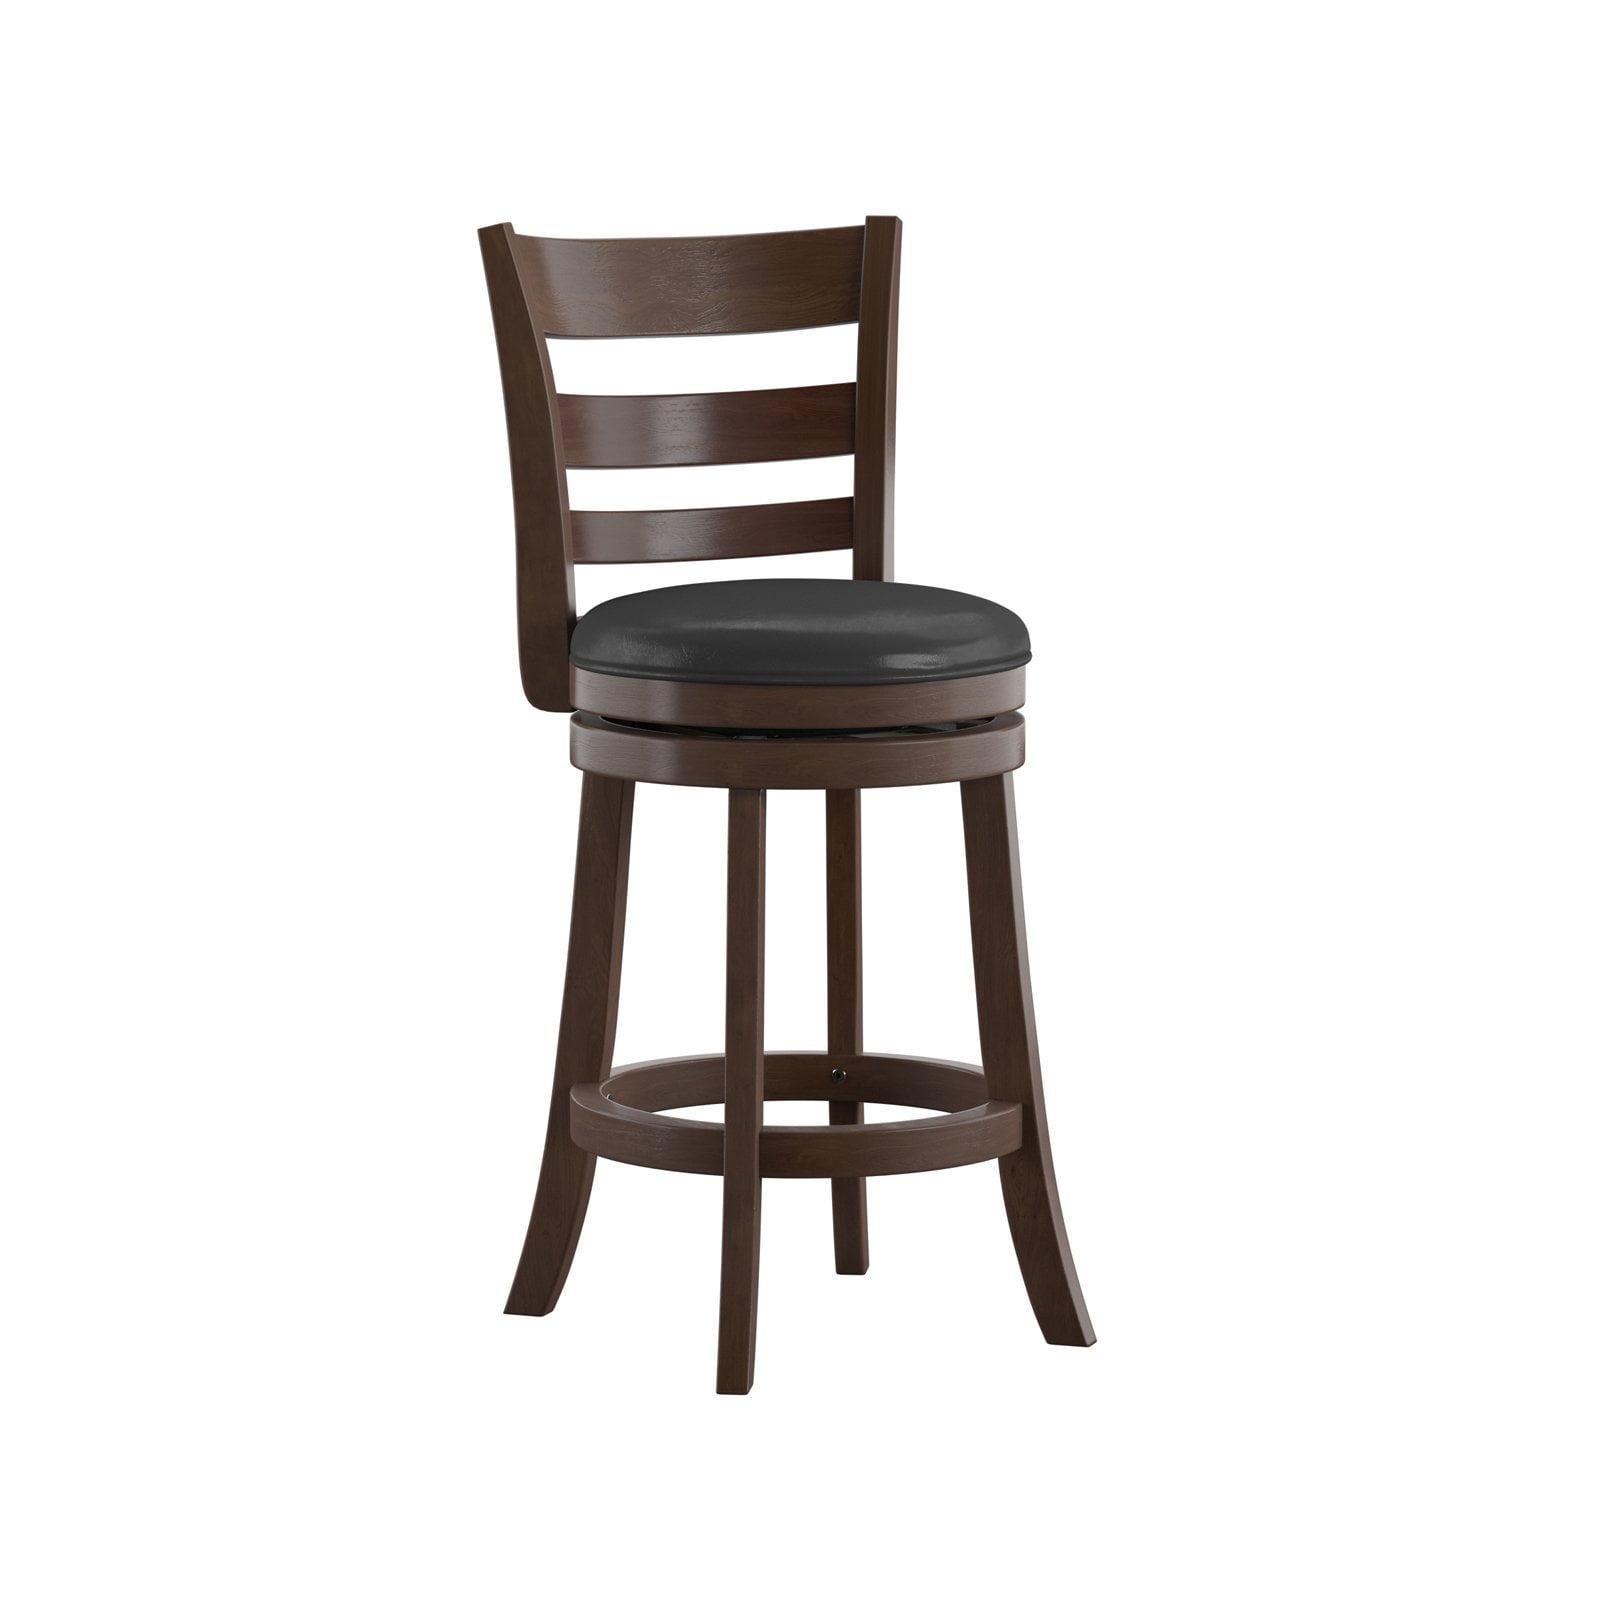 Traditional Black Leather Swivel Counter Stool with Wood Frame